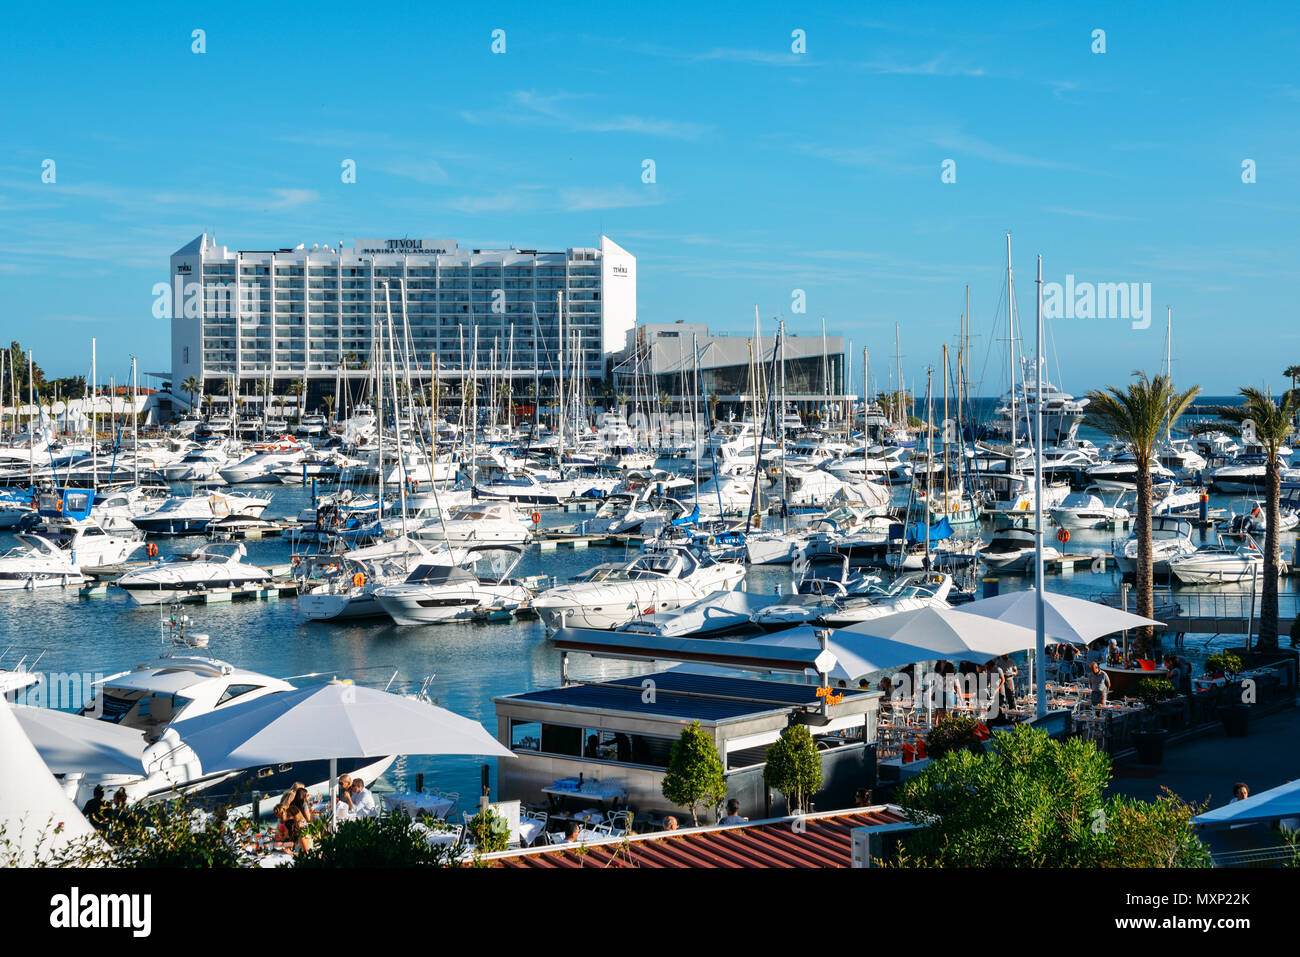 Promenade full of families next to marina at the fashionable resort town of VilaMoura in the southern Portuguese region of Algarve. Luxury Tivoli Hotel visible Stock Photo